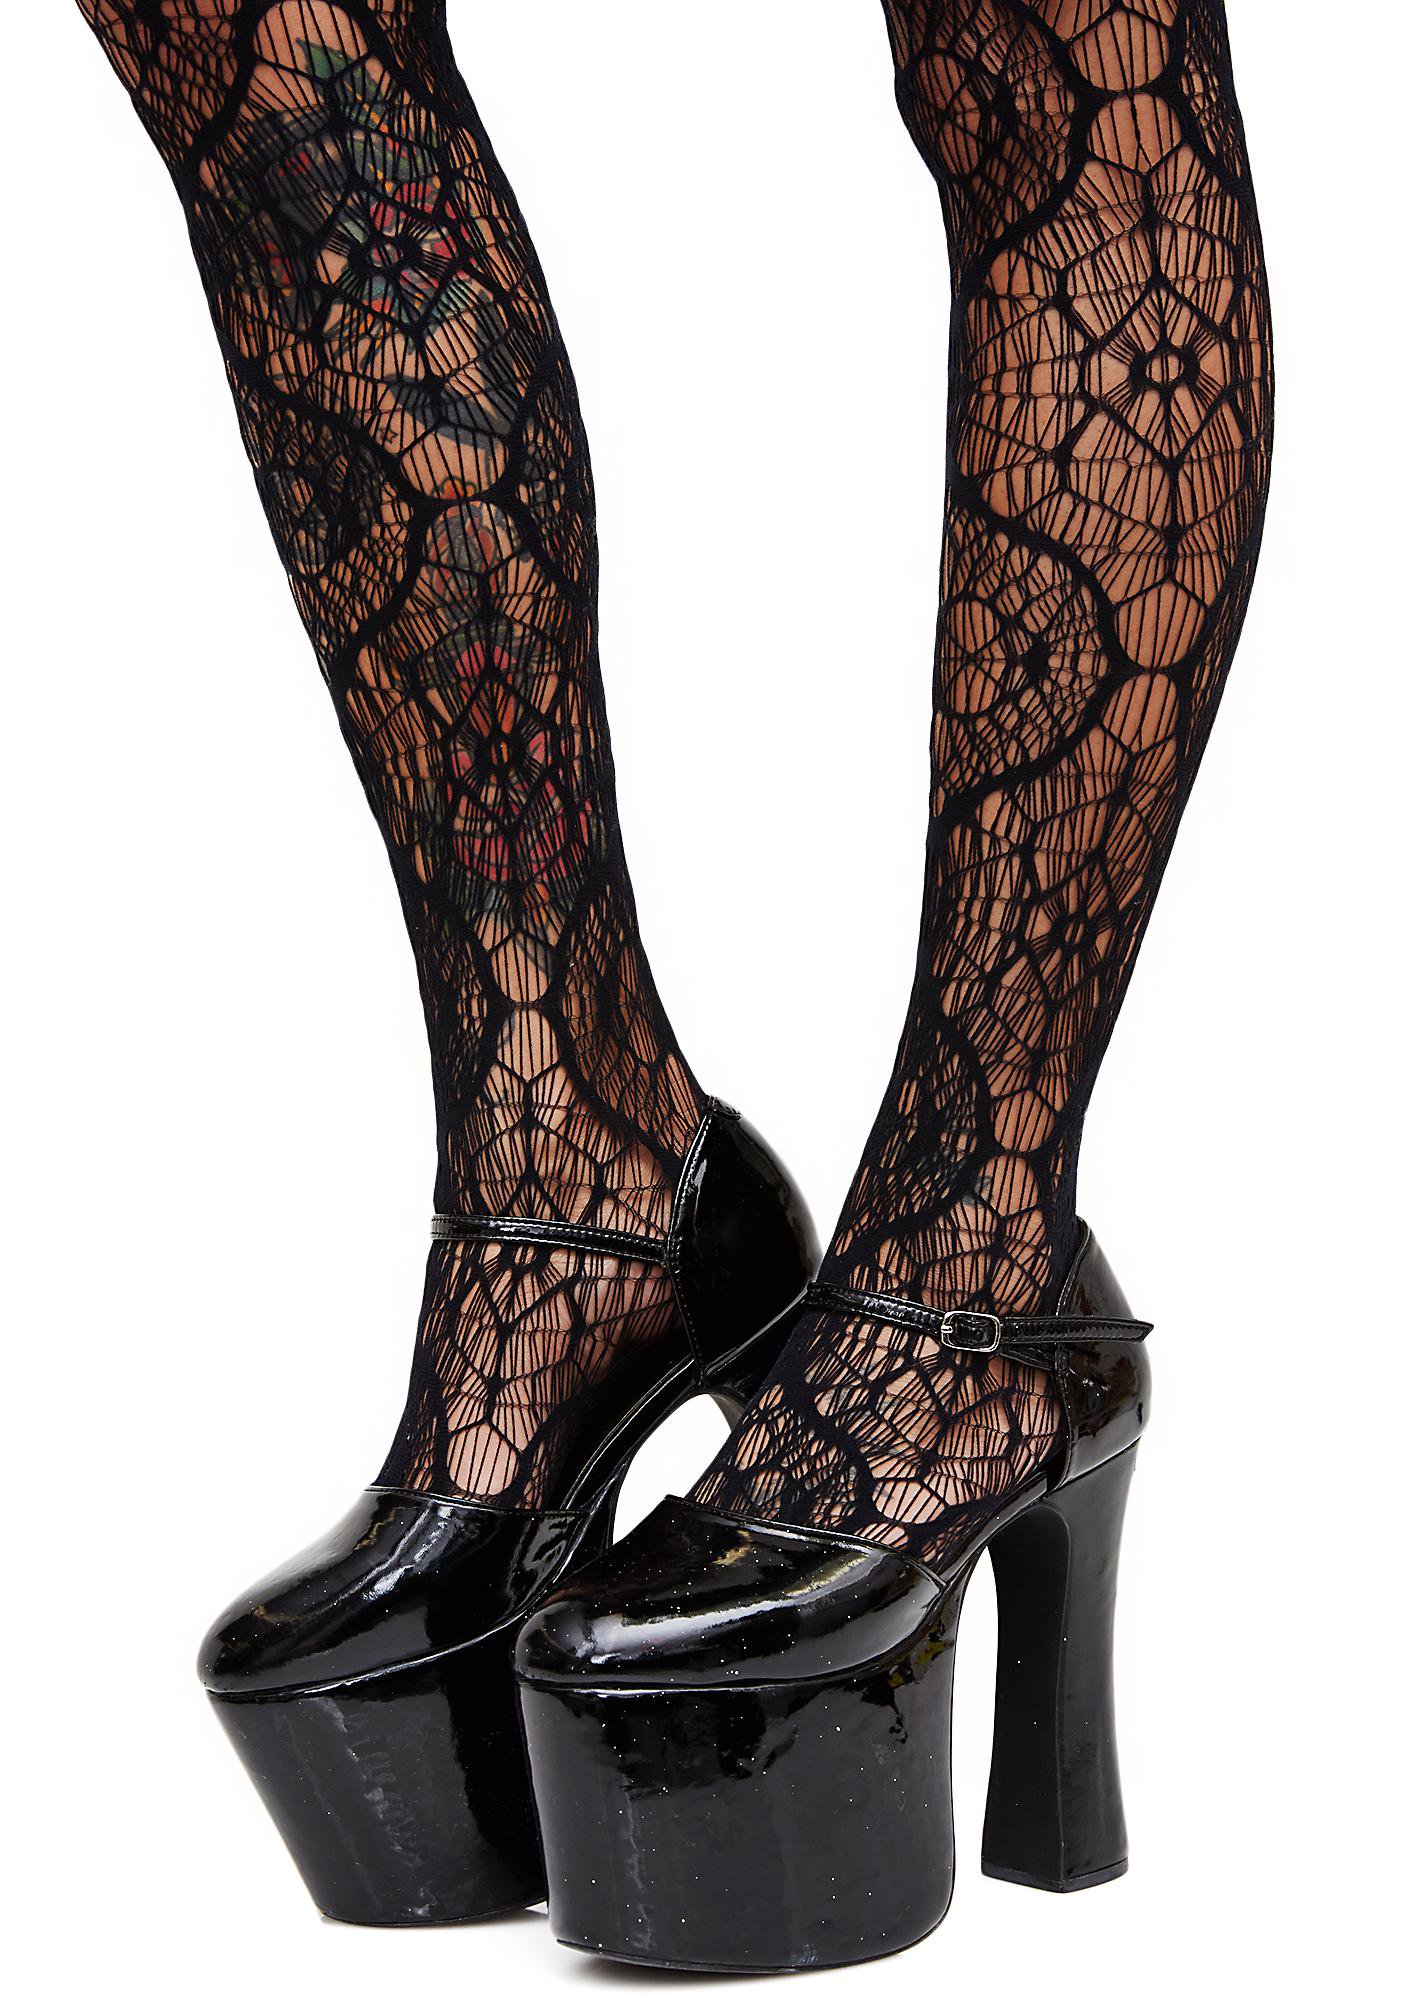 20 Macabre, Twisted, Unusual, Dark, Victorian, & Gothic Stocking Stuffers | Dolls Kill Cobweb Tights | Christmas Shopping | Gifts for Her | www.MeandAnnabelLee.com